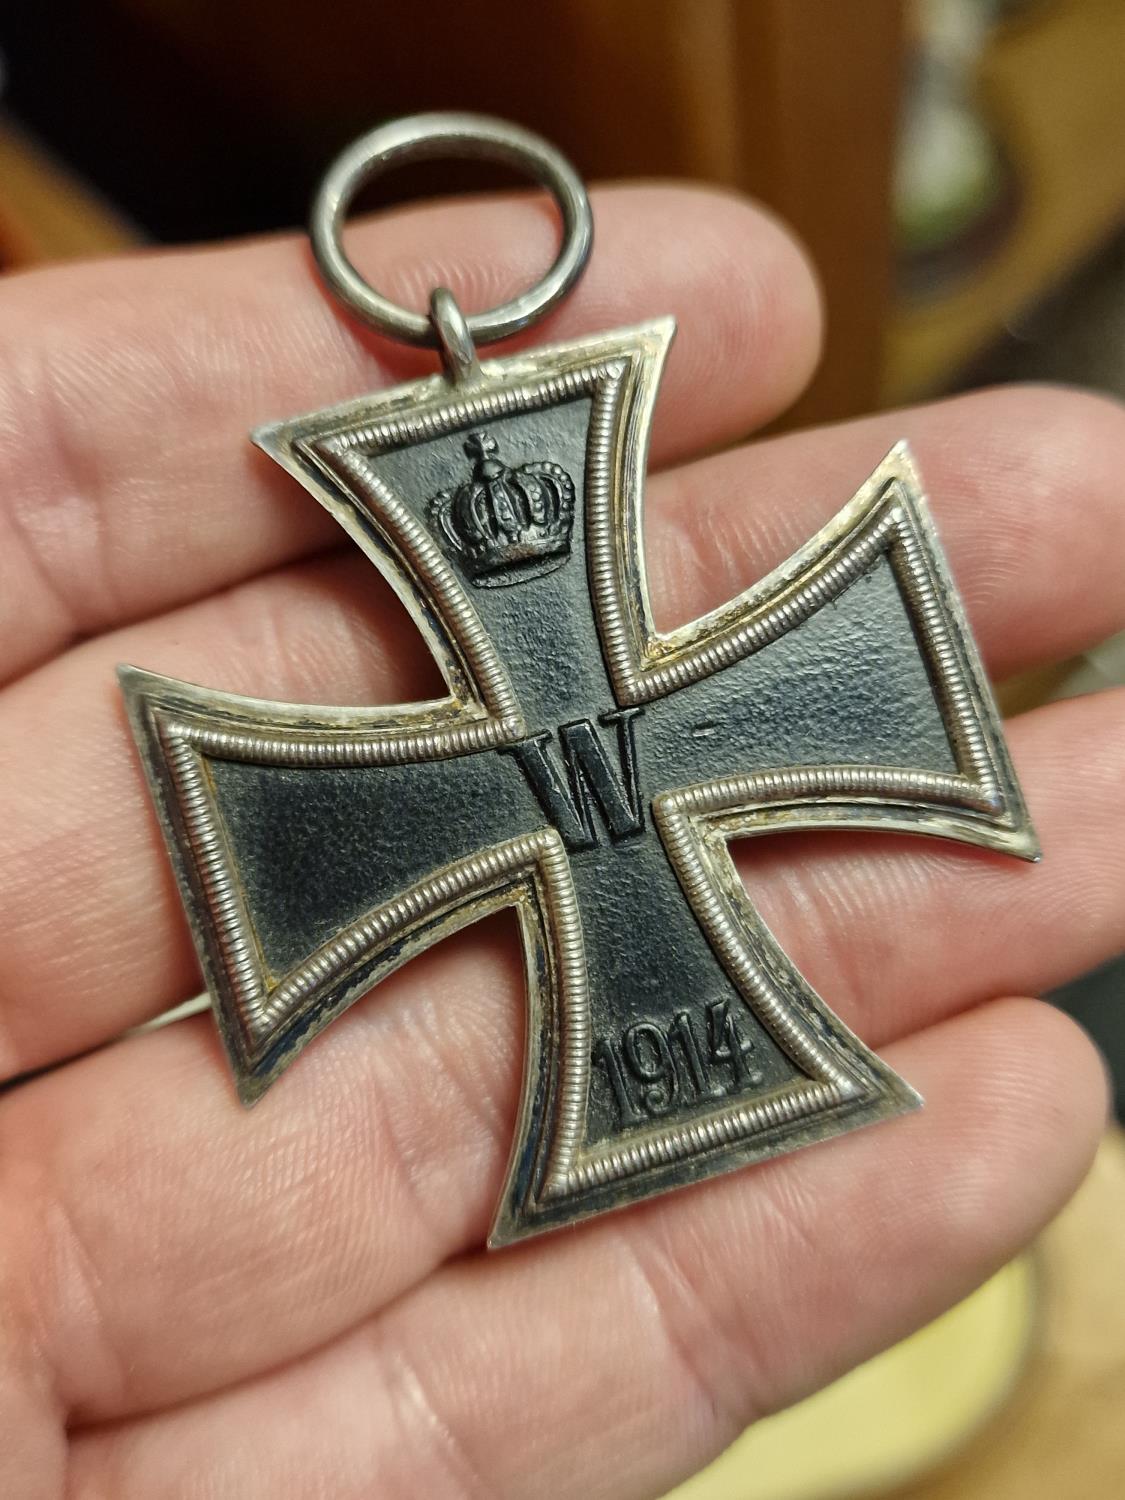 1914 Carl Dilenius Pforzheim German WWII Iron Cross Medal with Case - marked 'CD800' to ring - Image 3 of 5